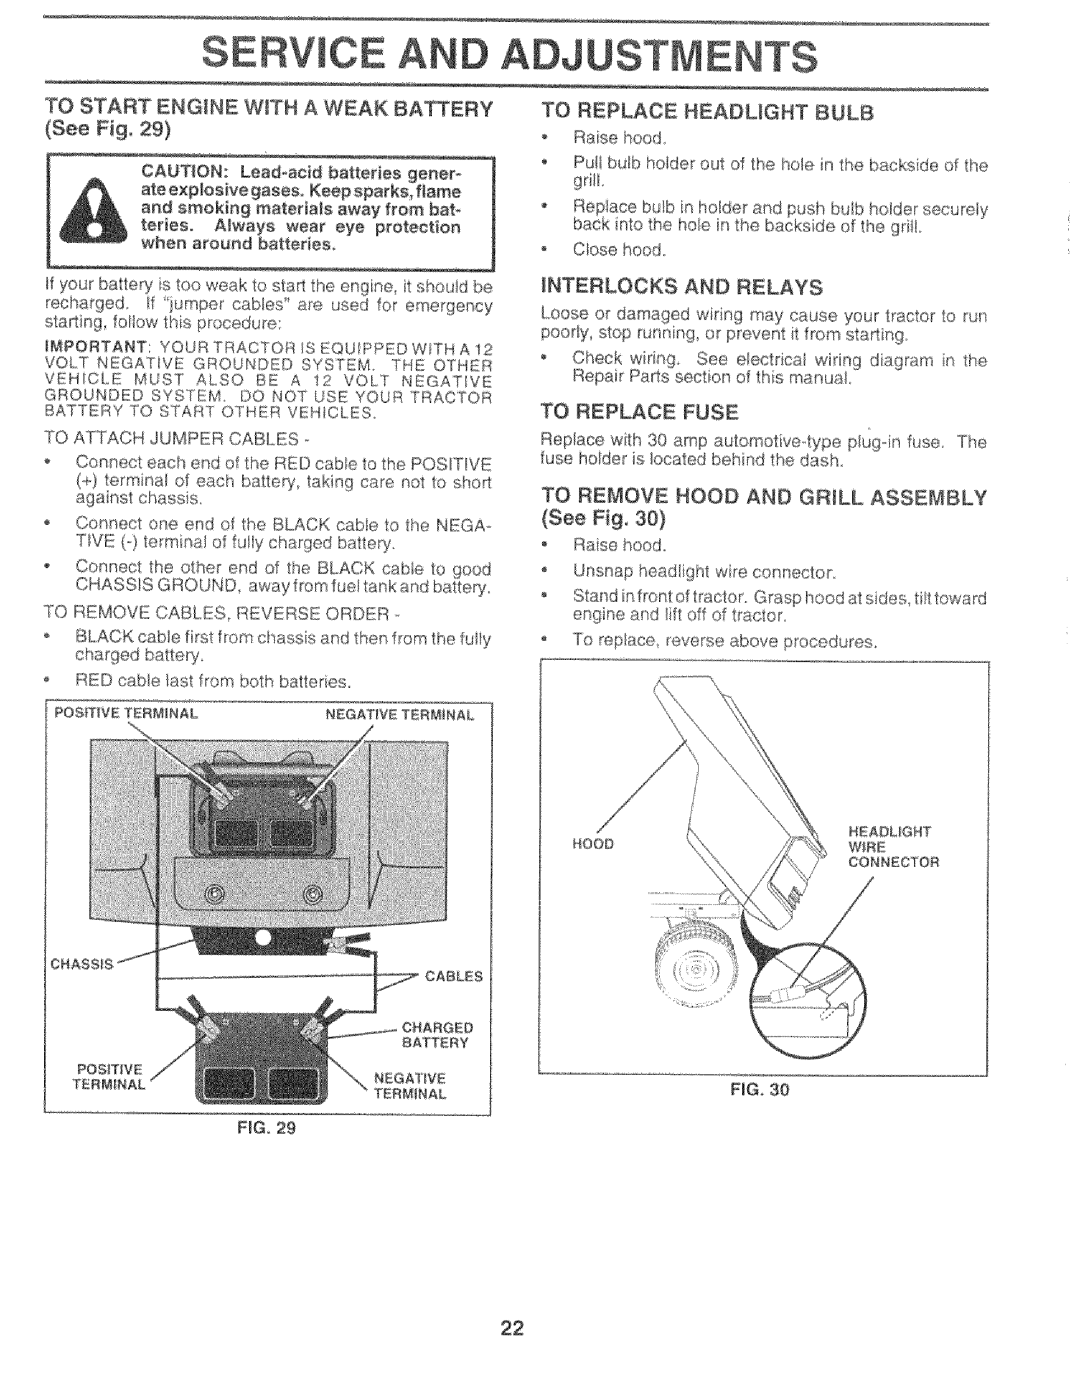 Sears 917.25759 manual To Start Engine W Th A Weak Bakery, To Replace Headlight Bulb, Interlocks And Relays 